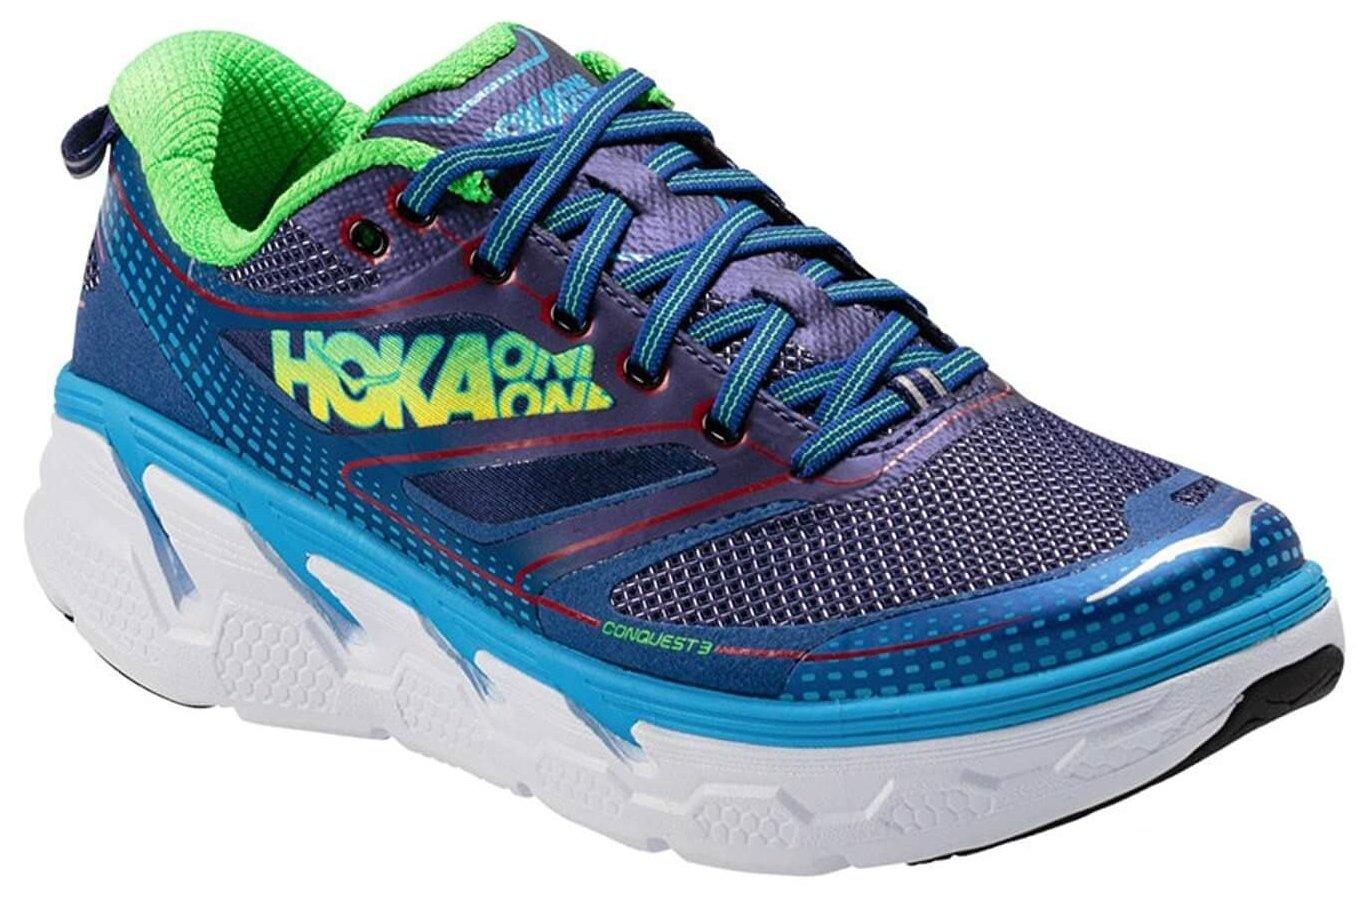 Hoka One One Conquest 3 Fully Reviewed 1